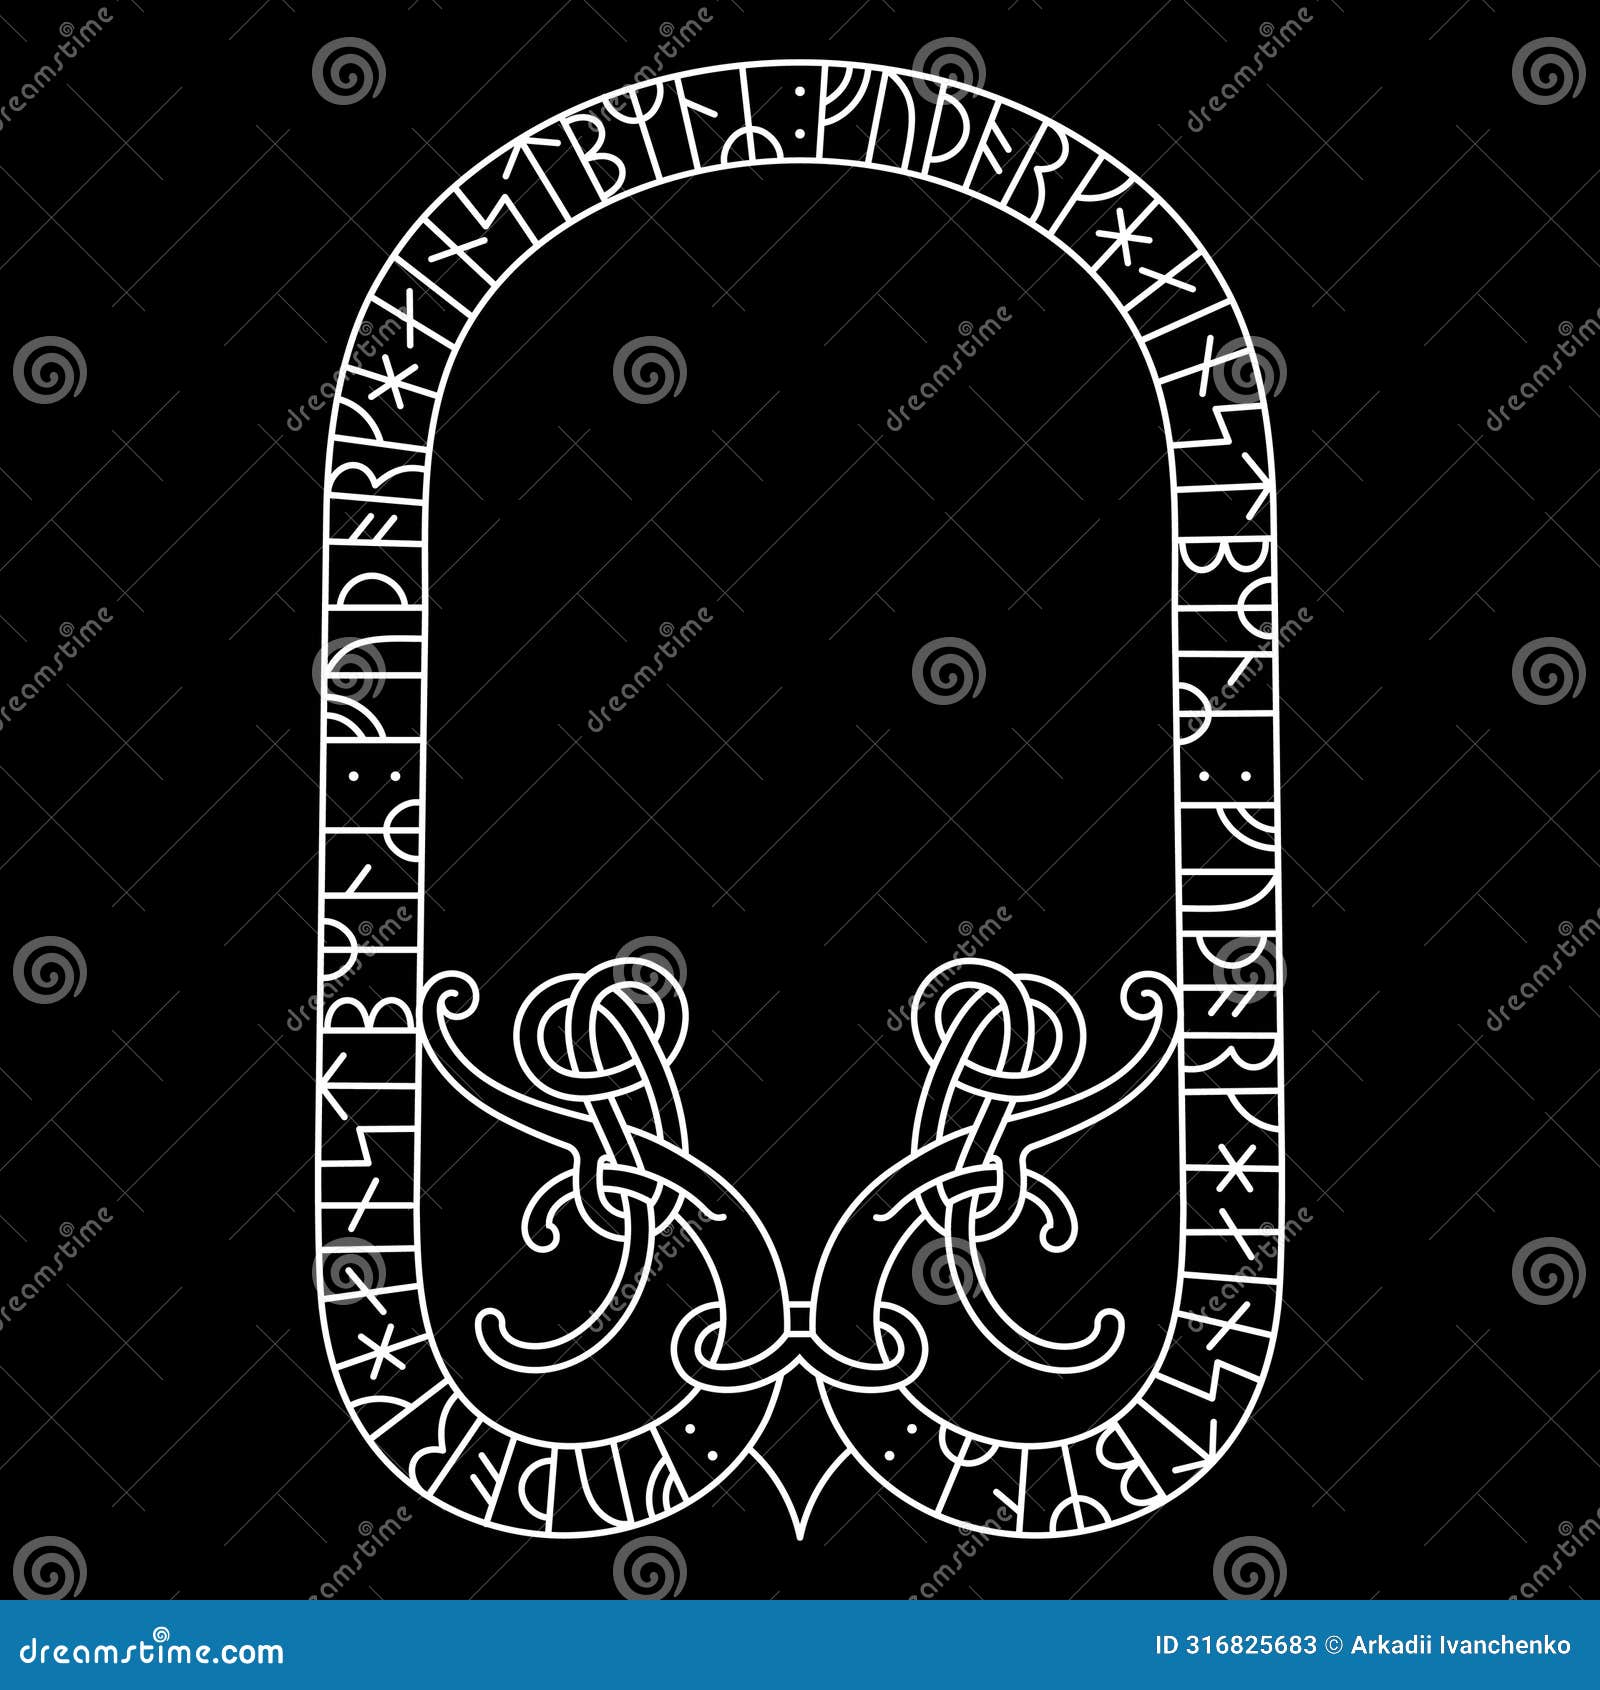 viking scandinavian . ancient decorative mythical animal in celtic, scandinavian style